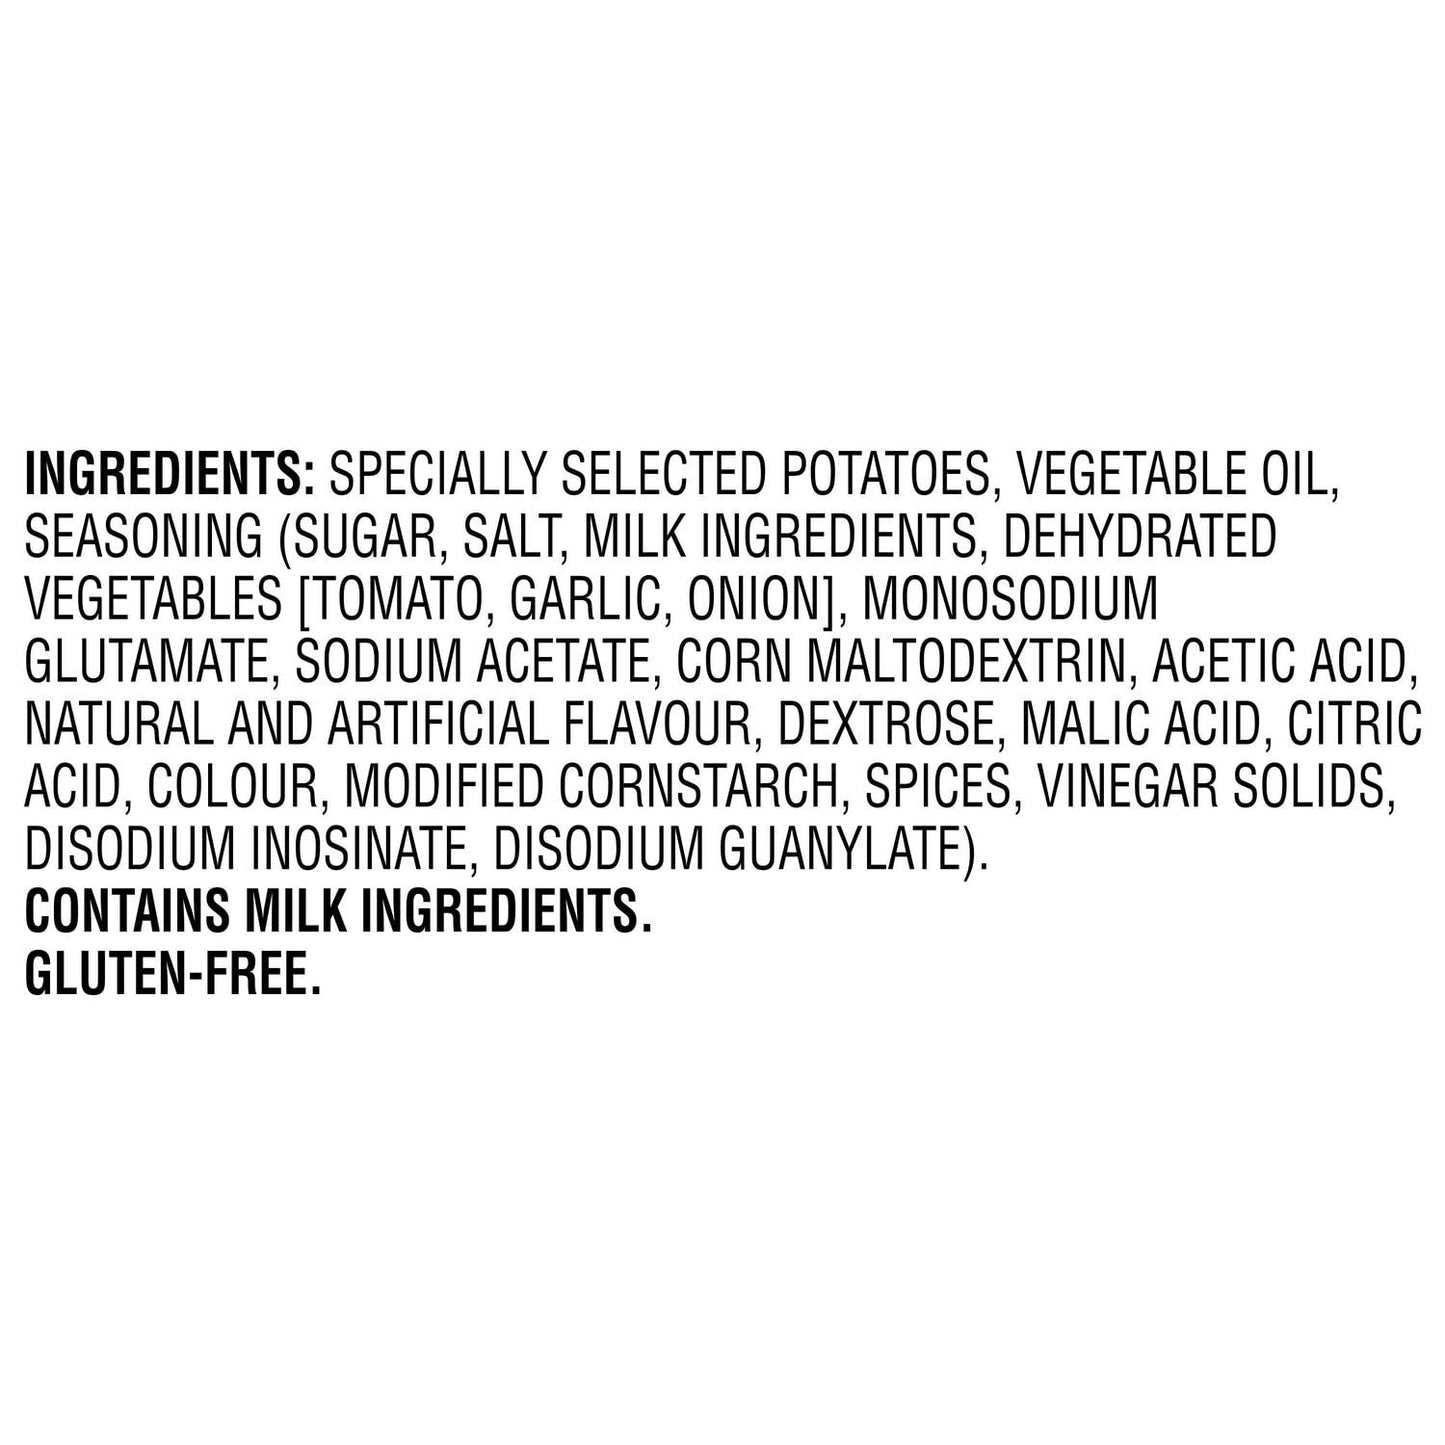 Lays Ketchup Potato Chips Snack Bag Ingredients